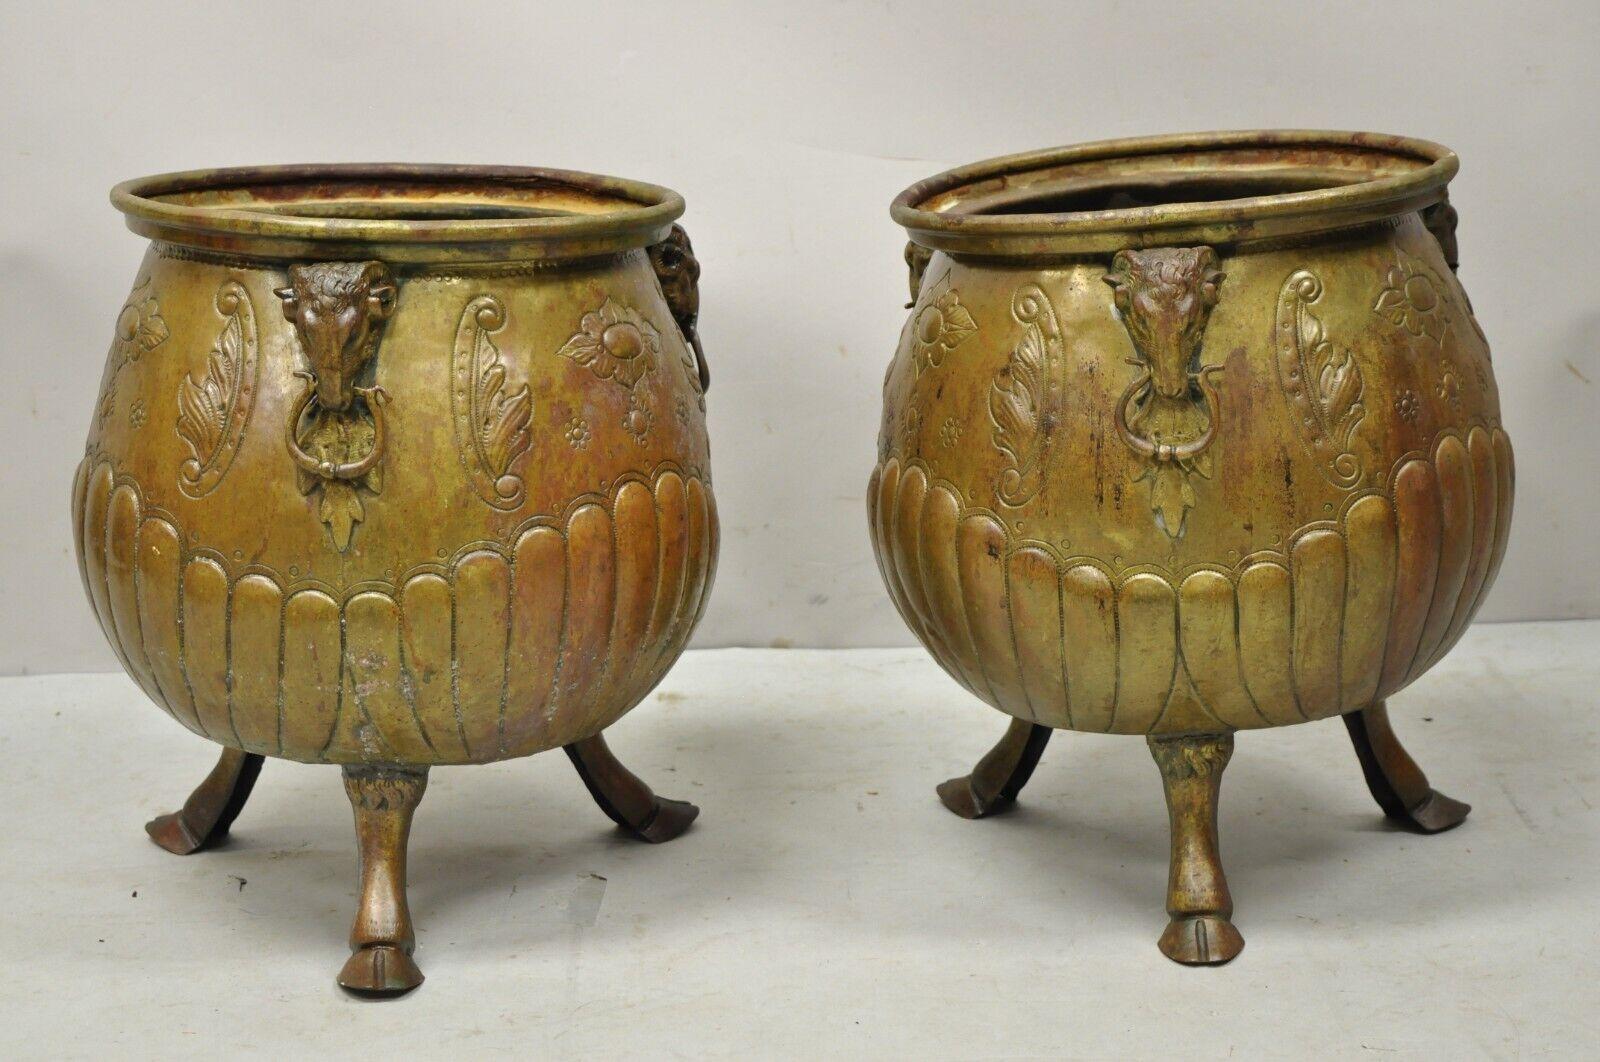 Antique French Regency Neoclassical Rams Head Copper Planter Pot - a Pair For Sale 6